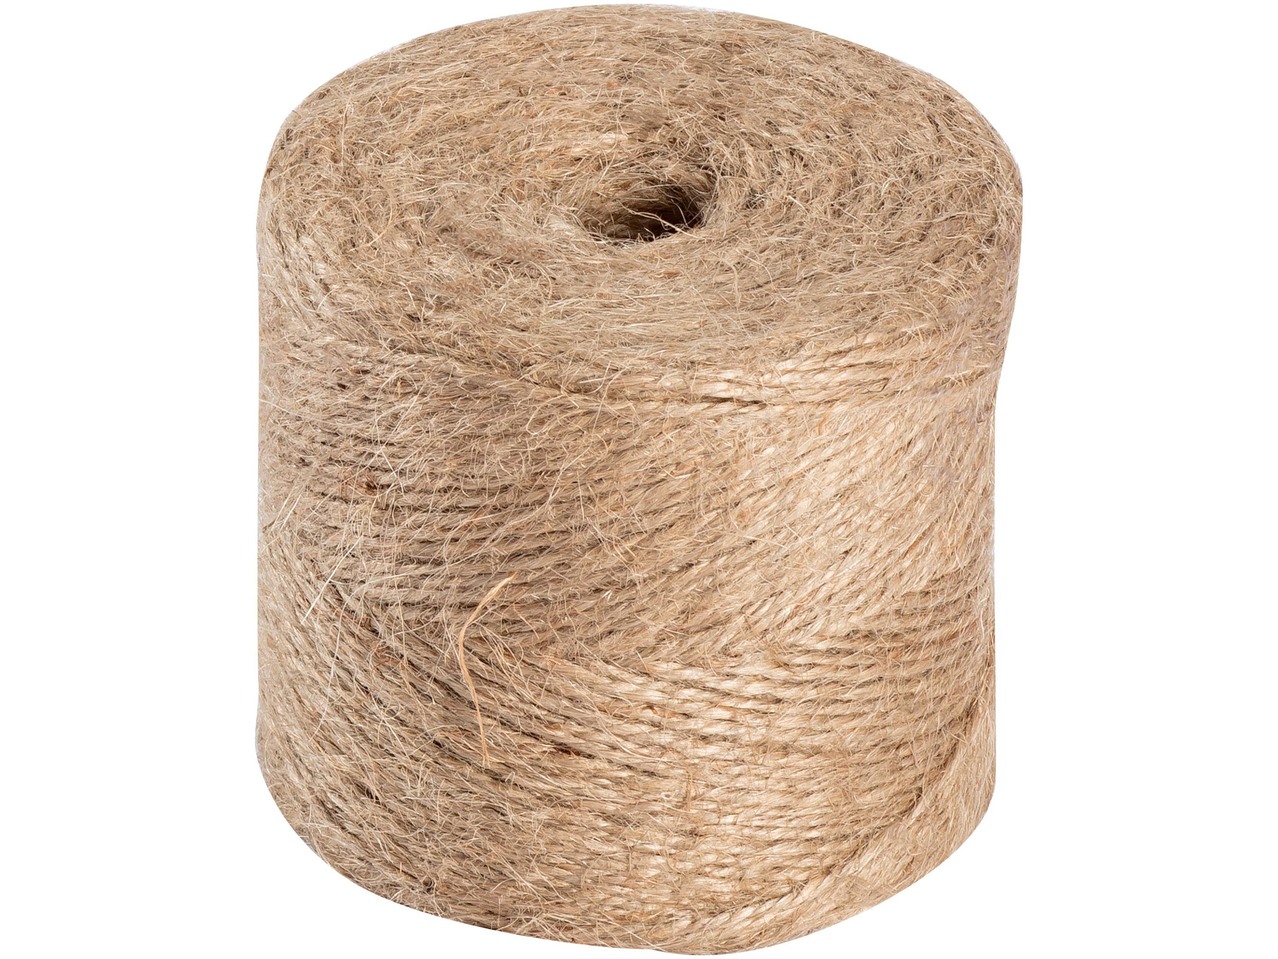 Rope or String for Tying